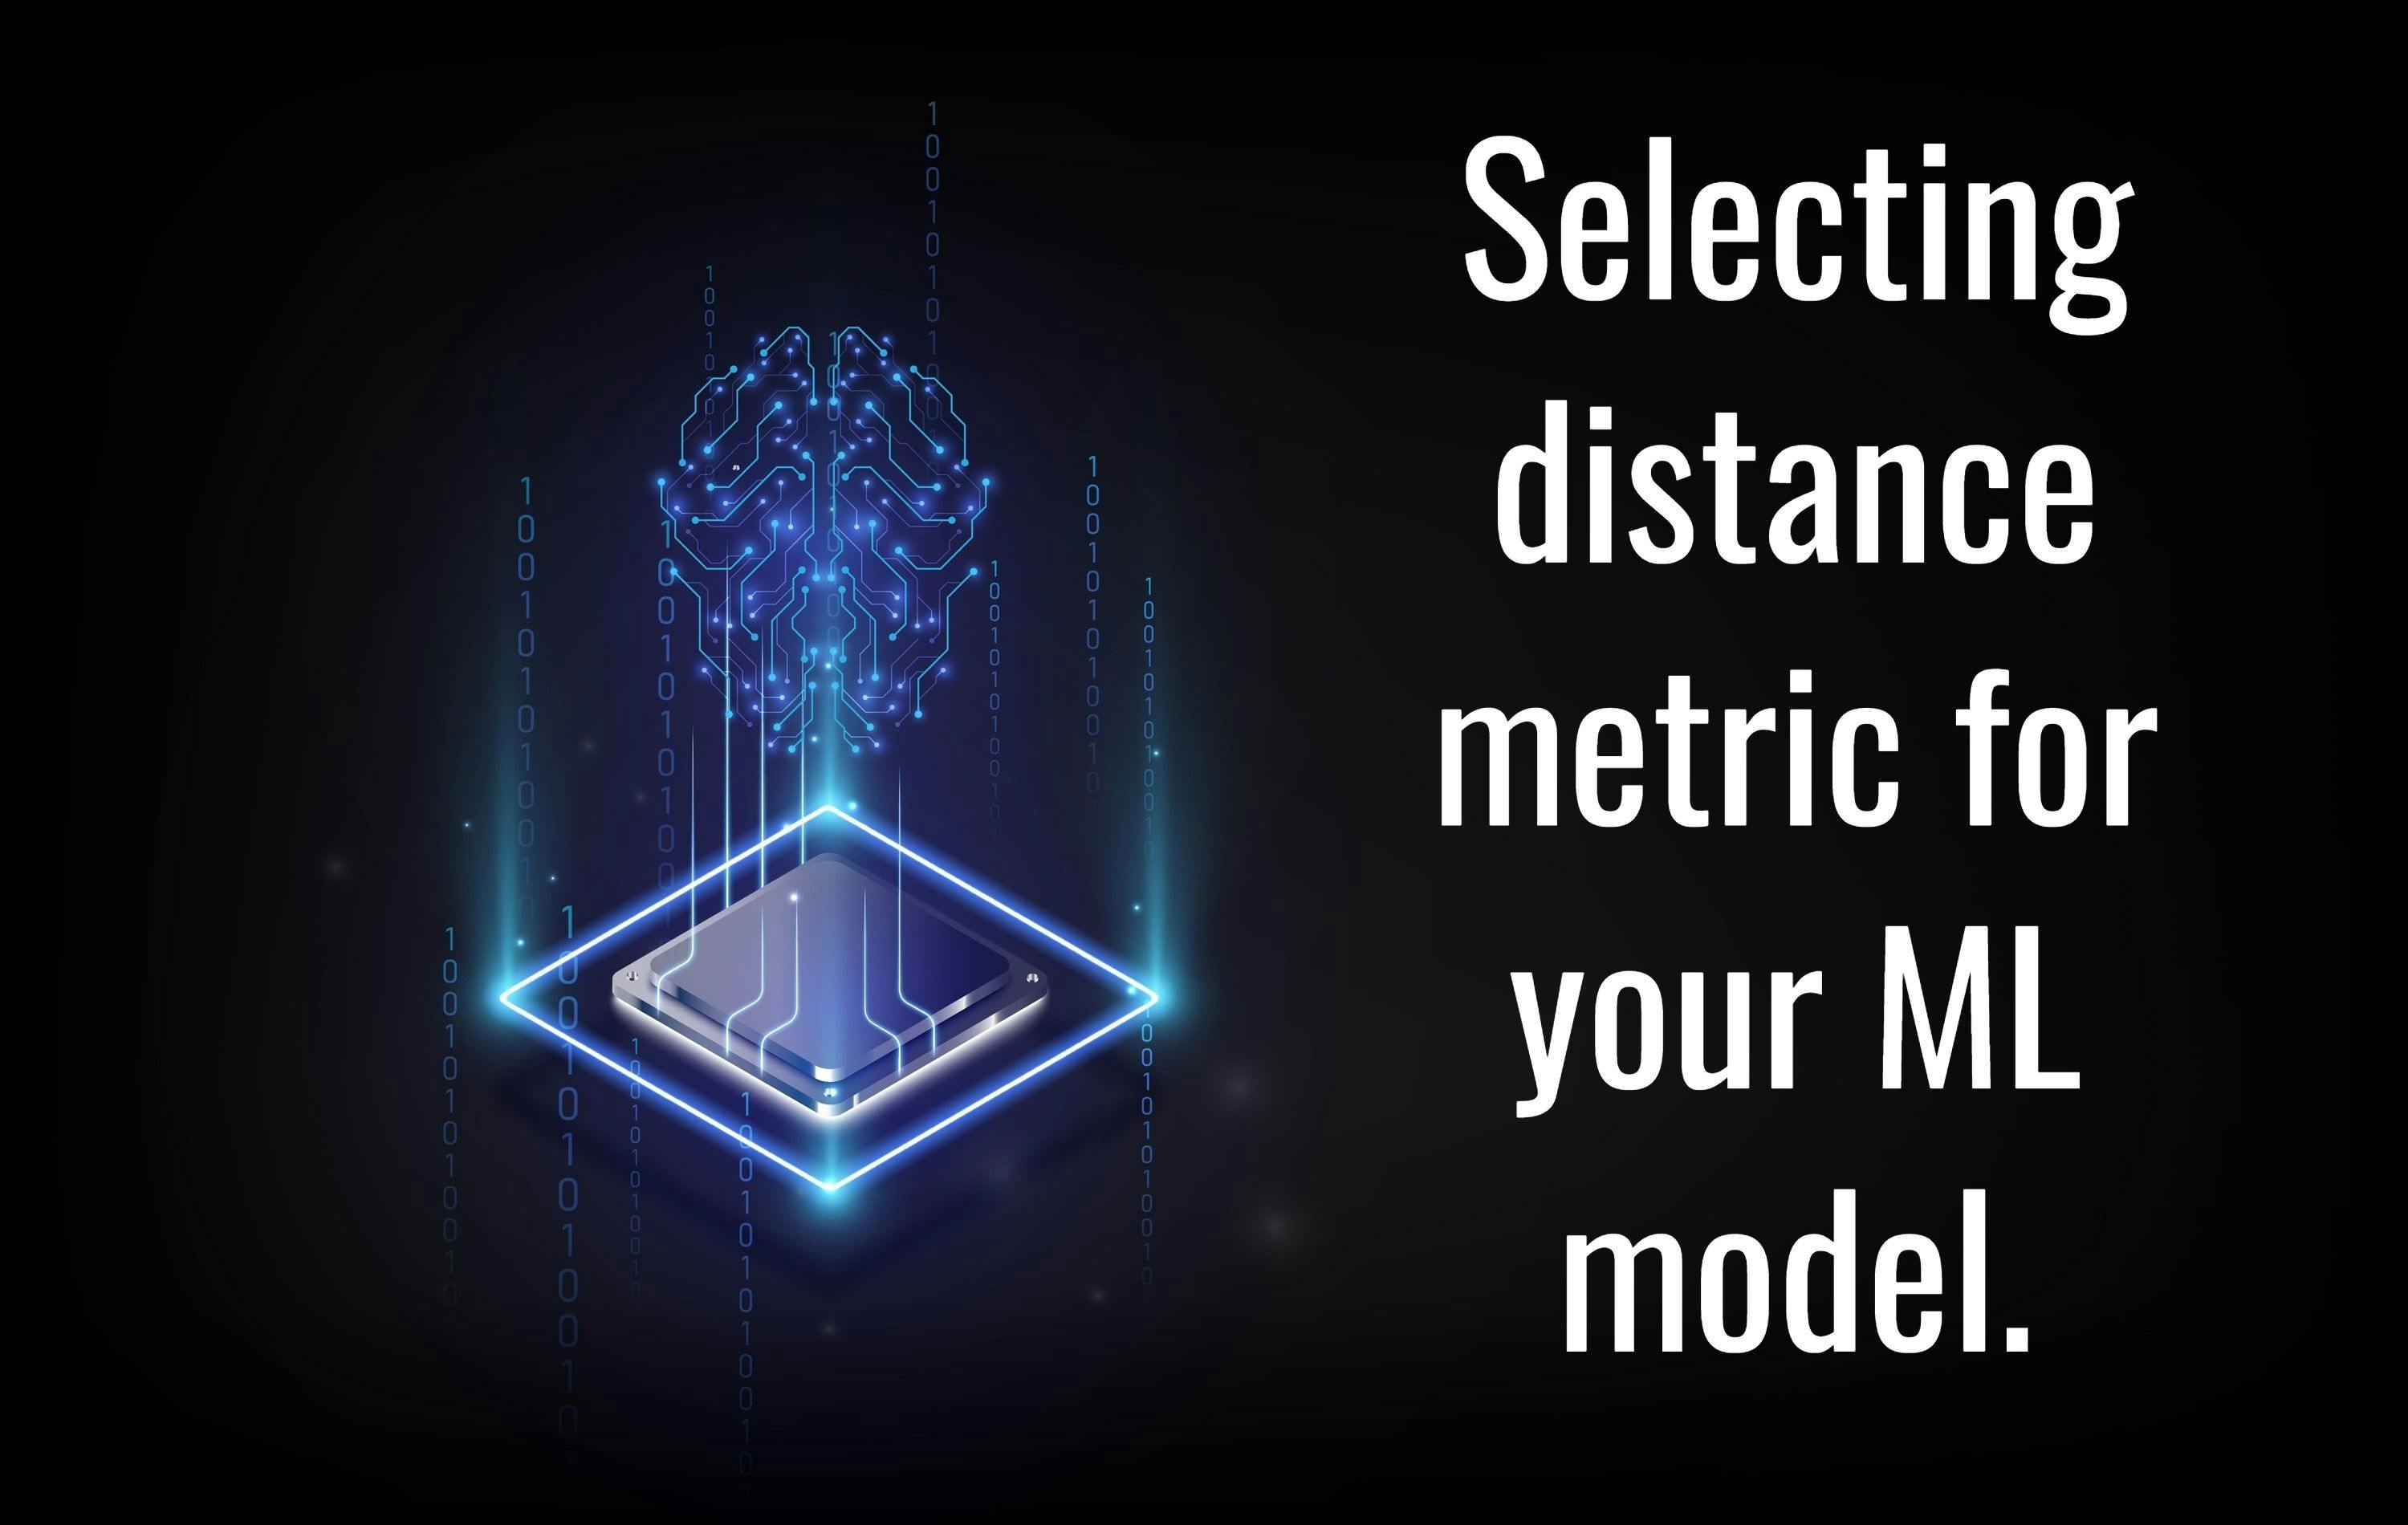 Selecting distance metric for ML model